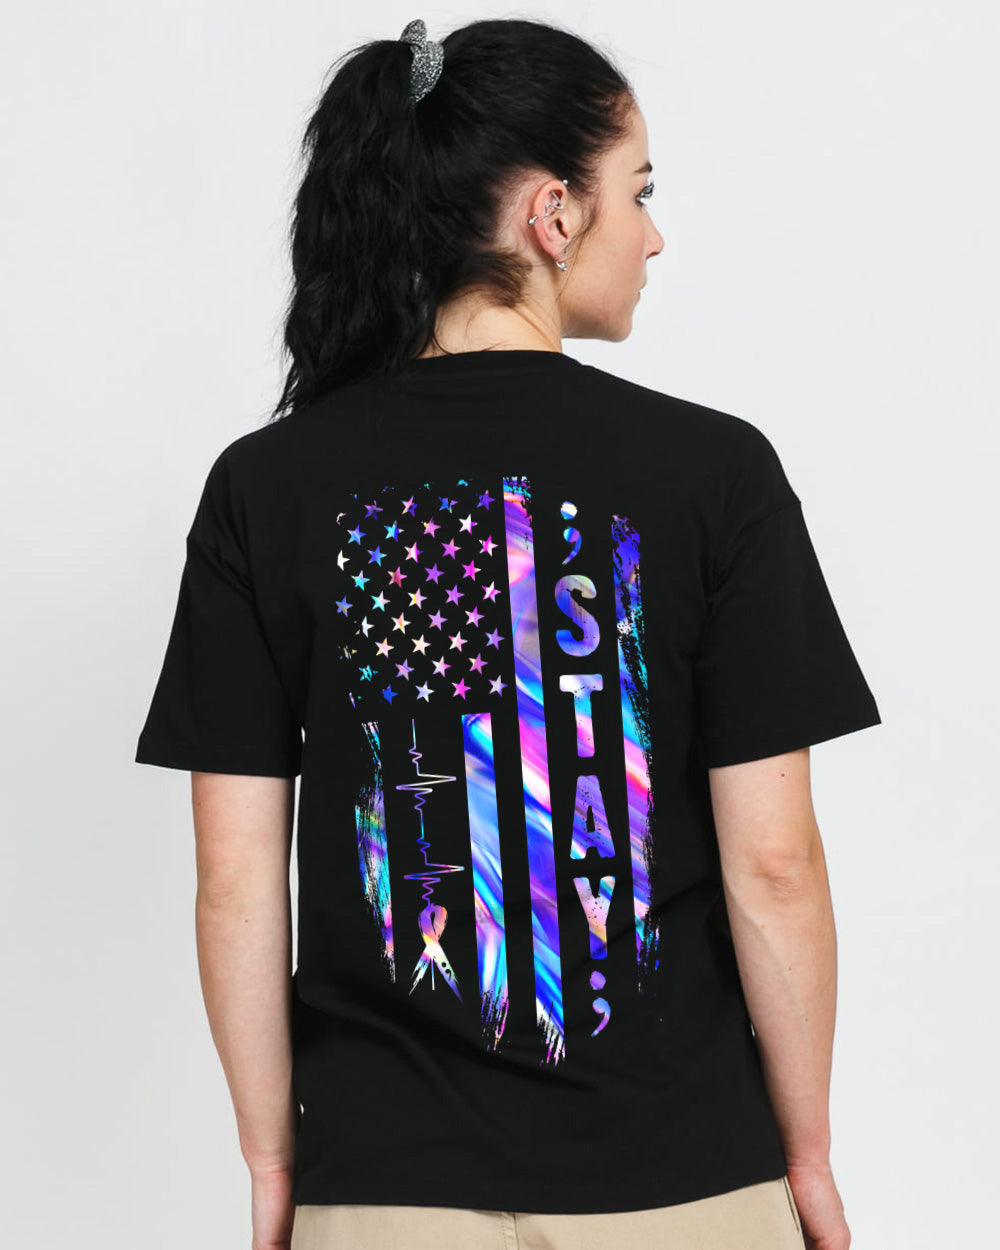 Stay Flag Women's Suicide Prevention Awareness Tshirt